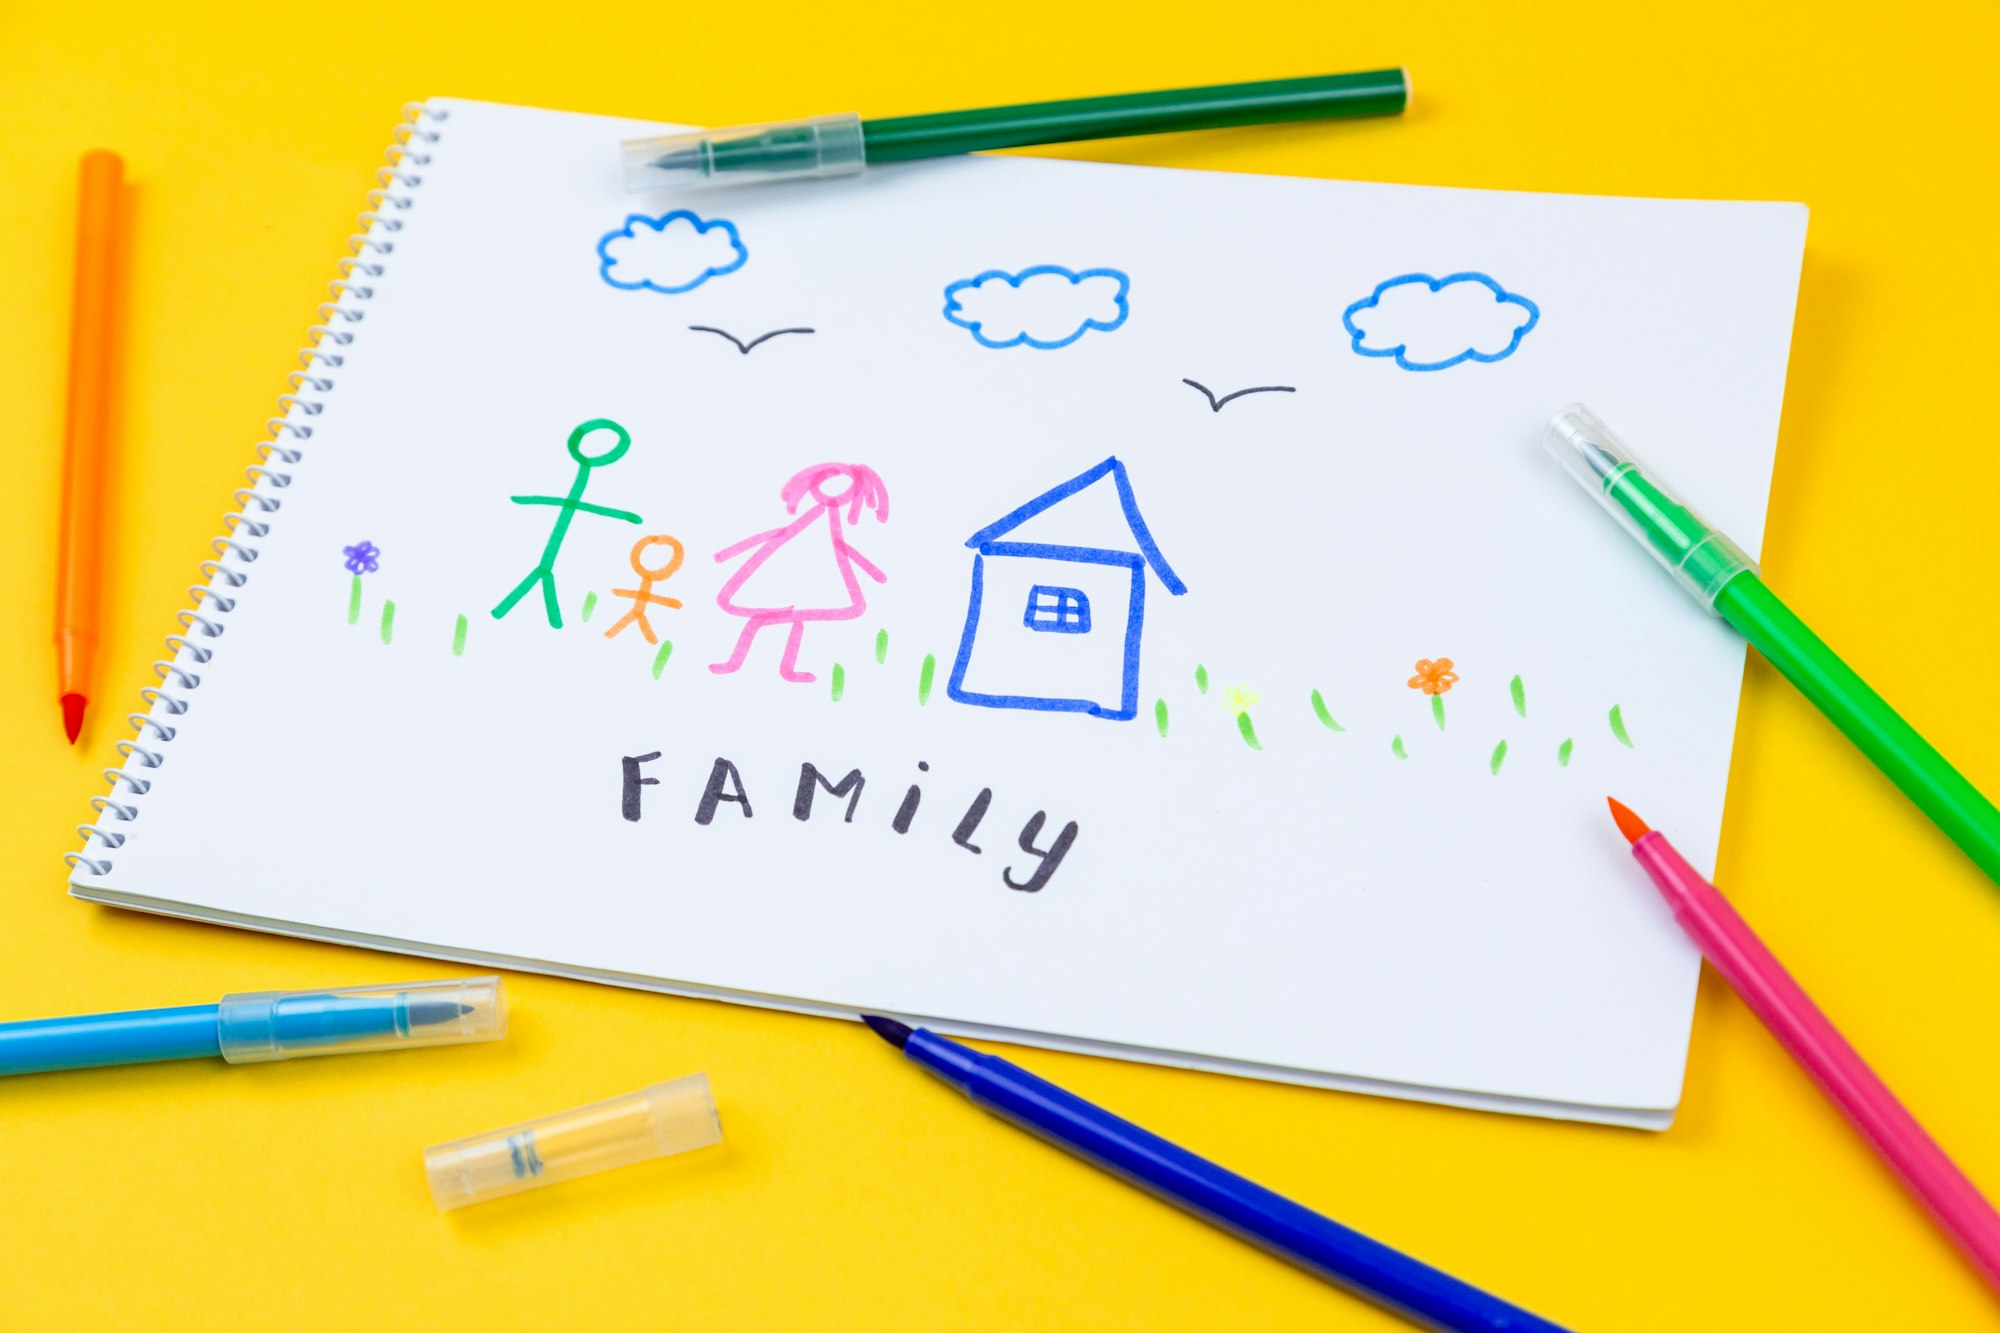 Stick drawing of a family and their house on paper using rainbow-colored pens.